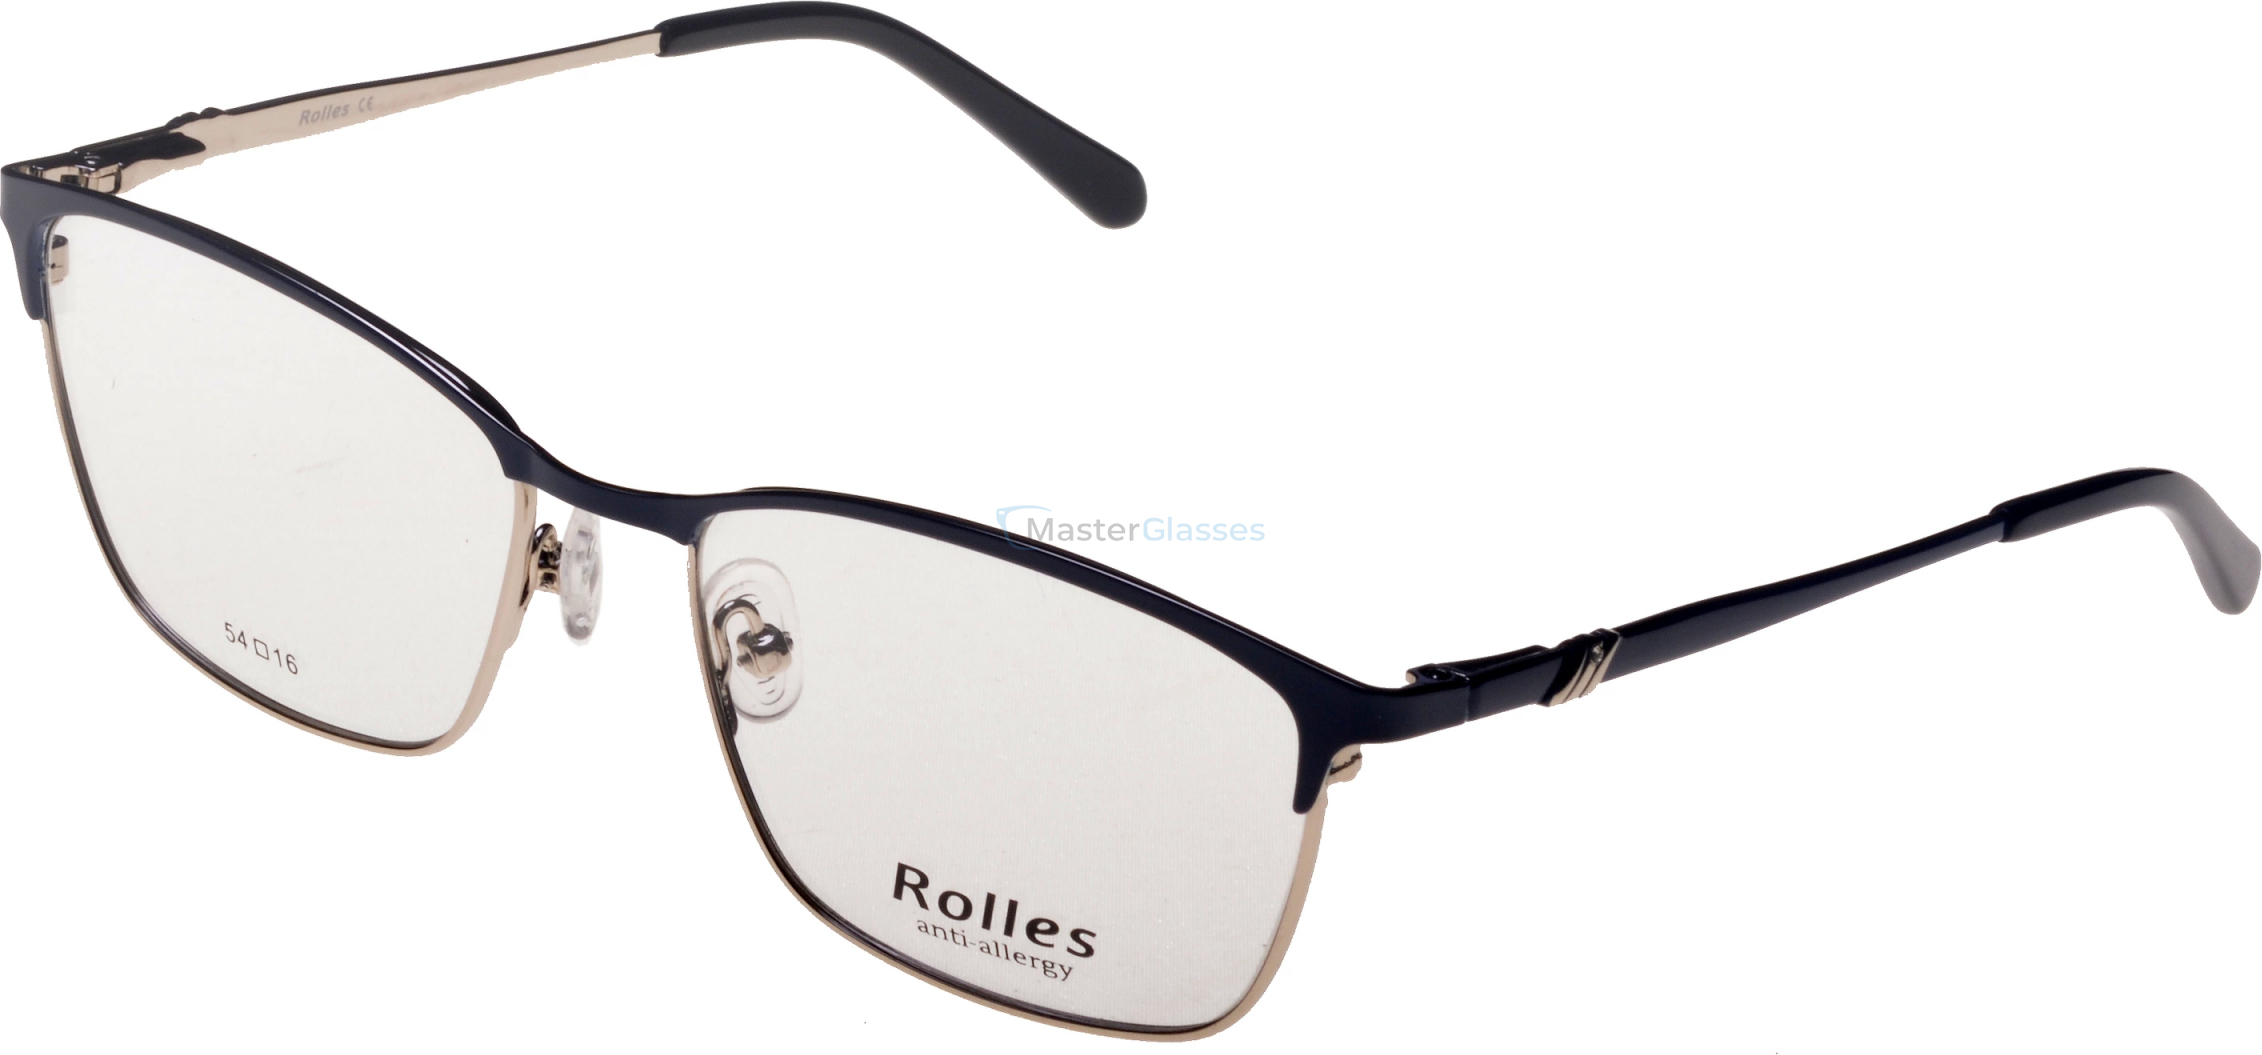  Rolles 680 01